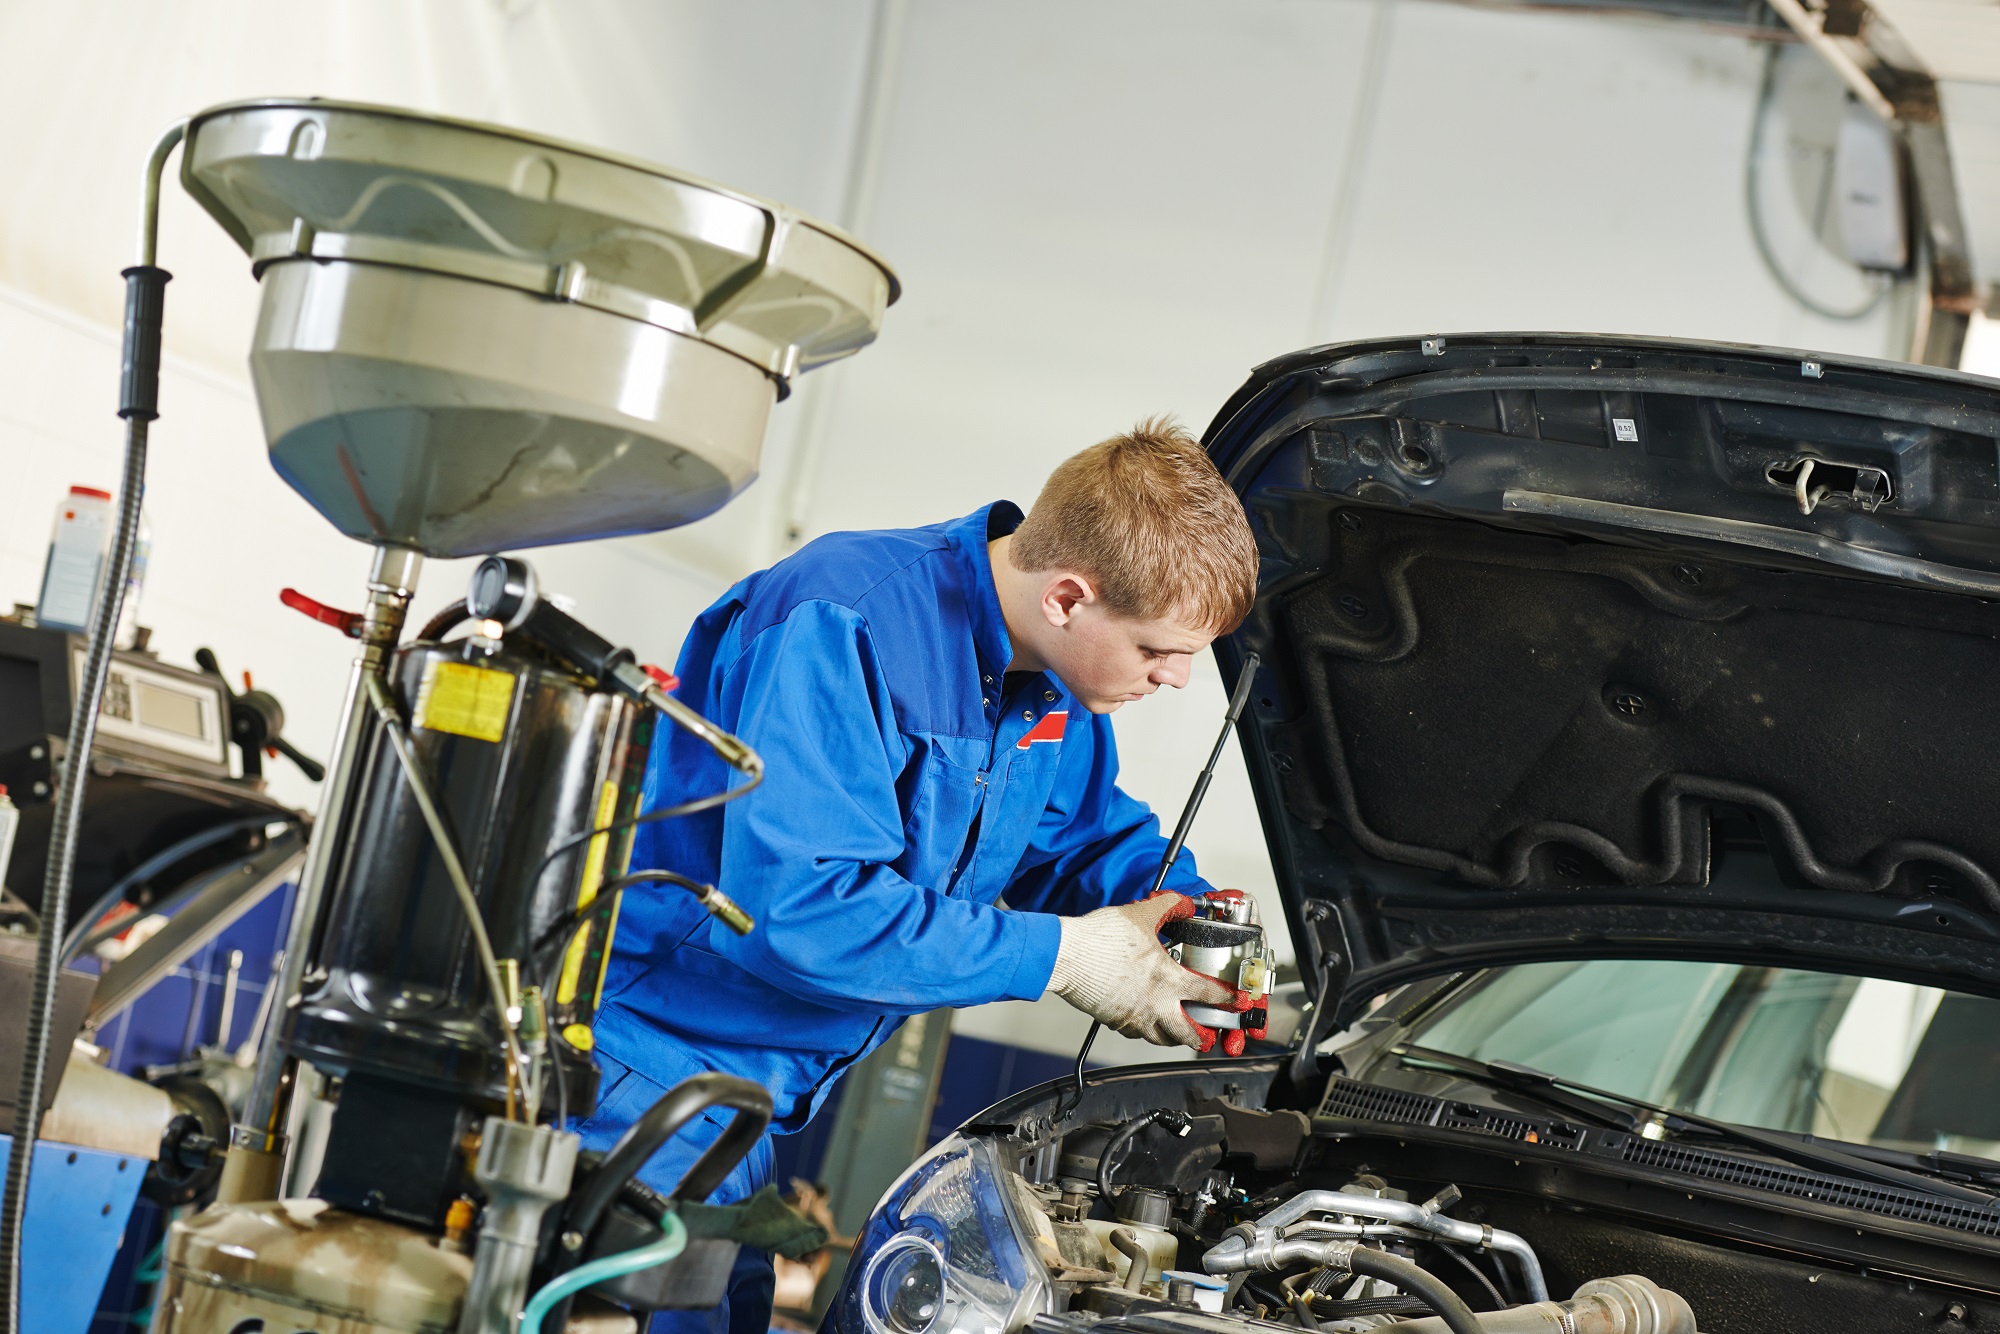 A few Tips on Finding a Reputable Auto Mechanic